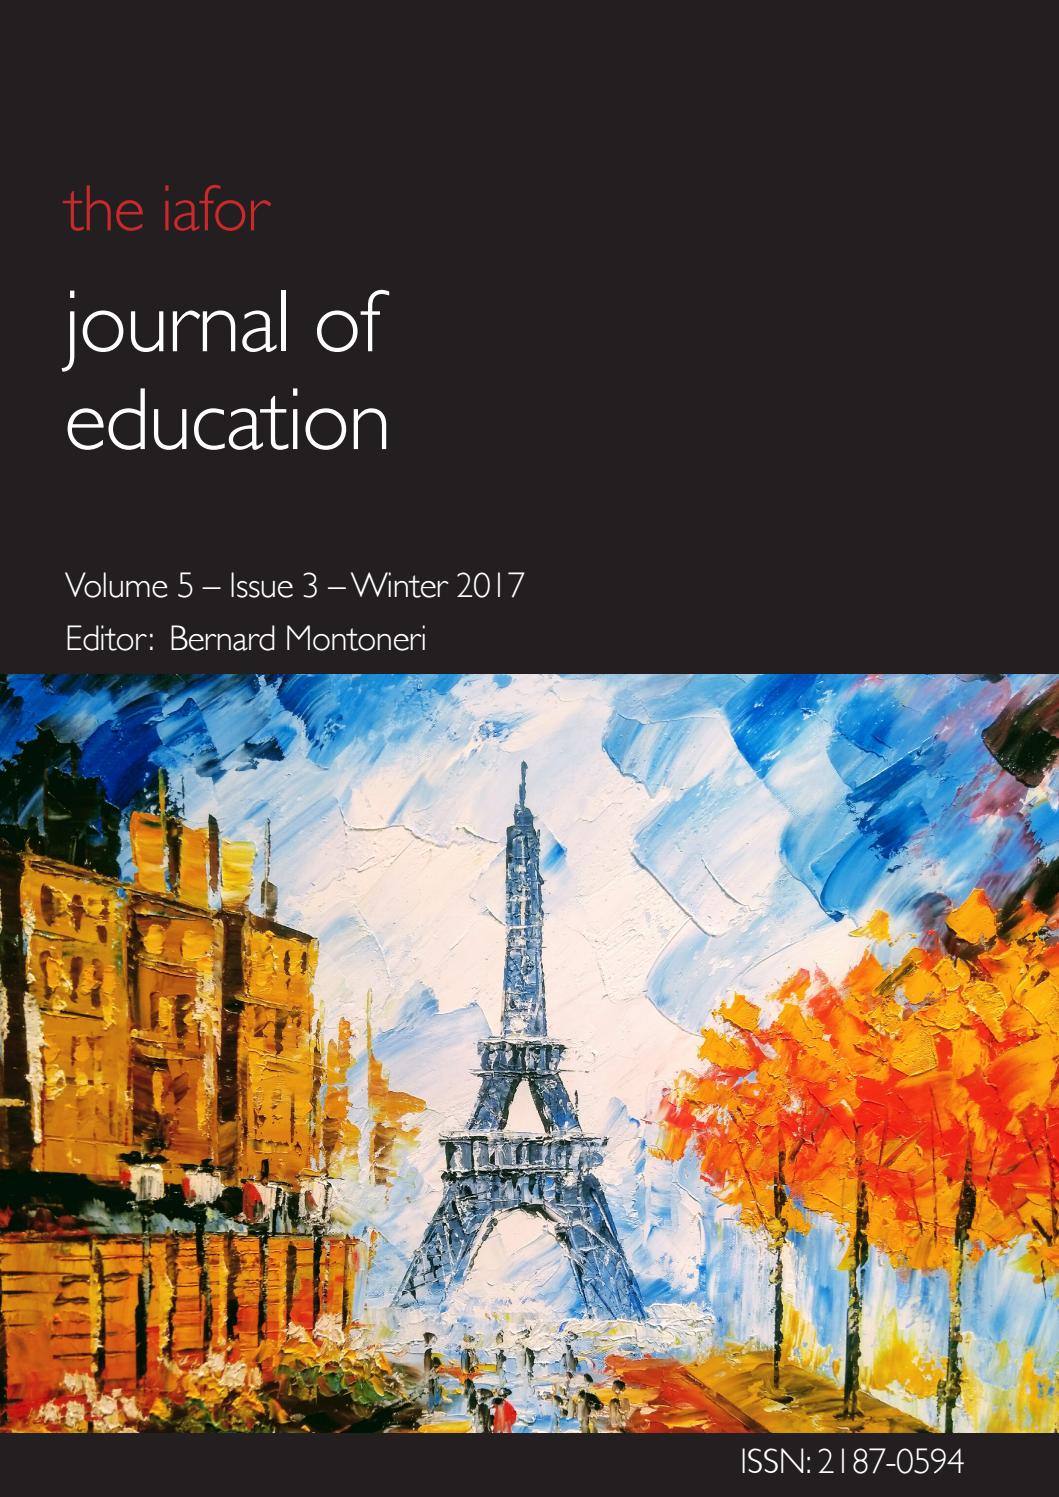 André Jardin Inspirant Iafor Journal Of Education Volume 5 issue 3 by Iafor issuu